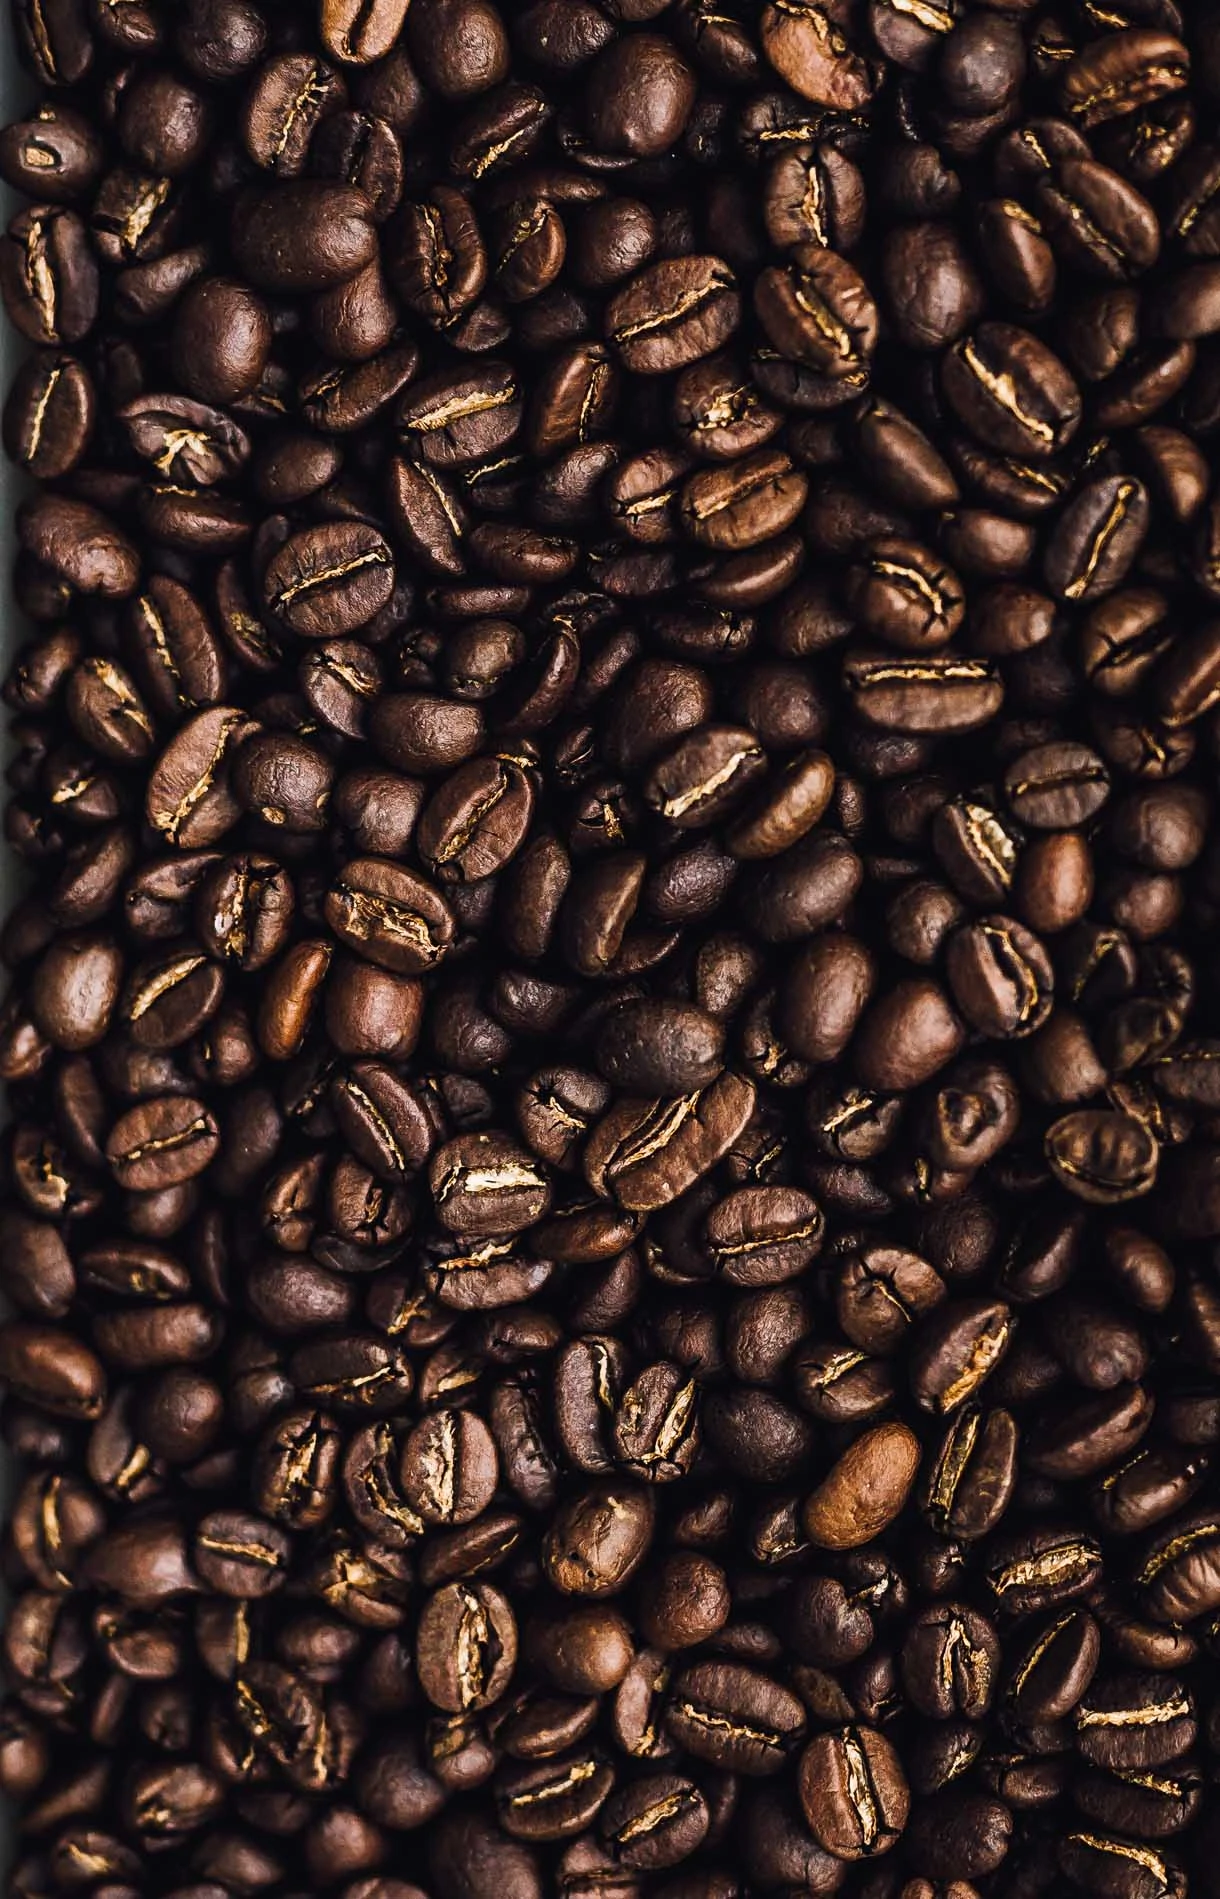 Fresh Roasted Coffee Beans from the Congo